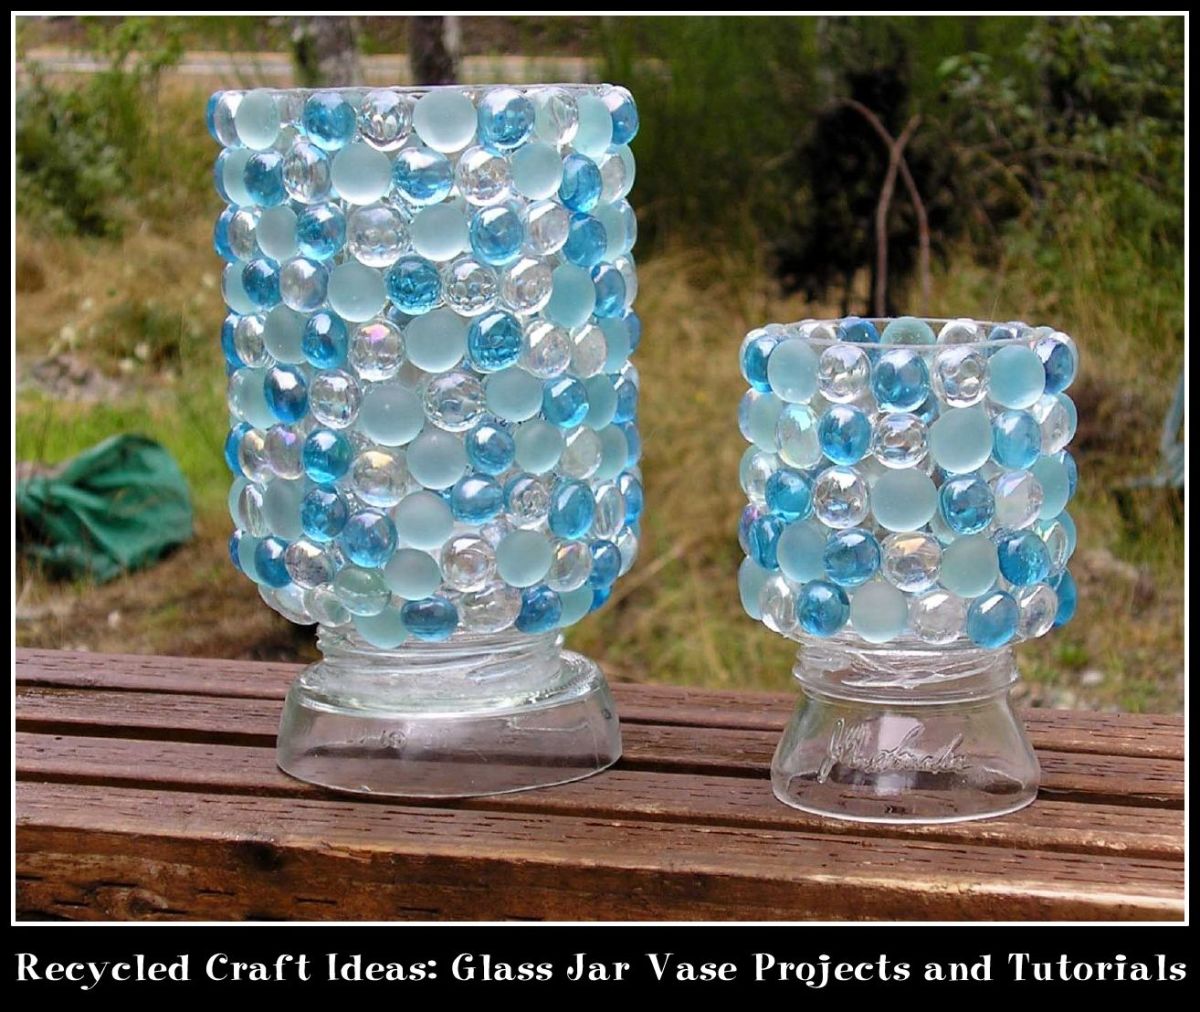 Recycled Craft Ideas: Glass Jar Vase Projects and Tutorials | HubPages